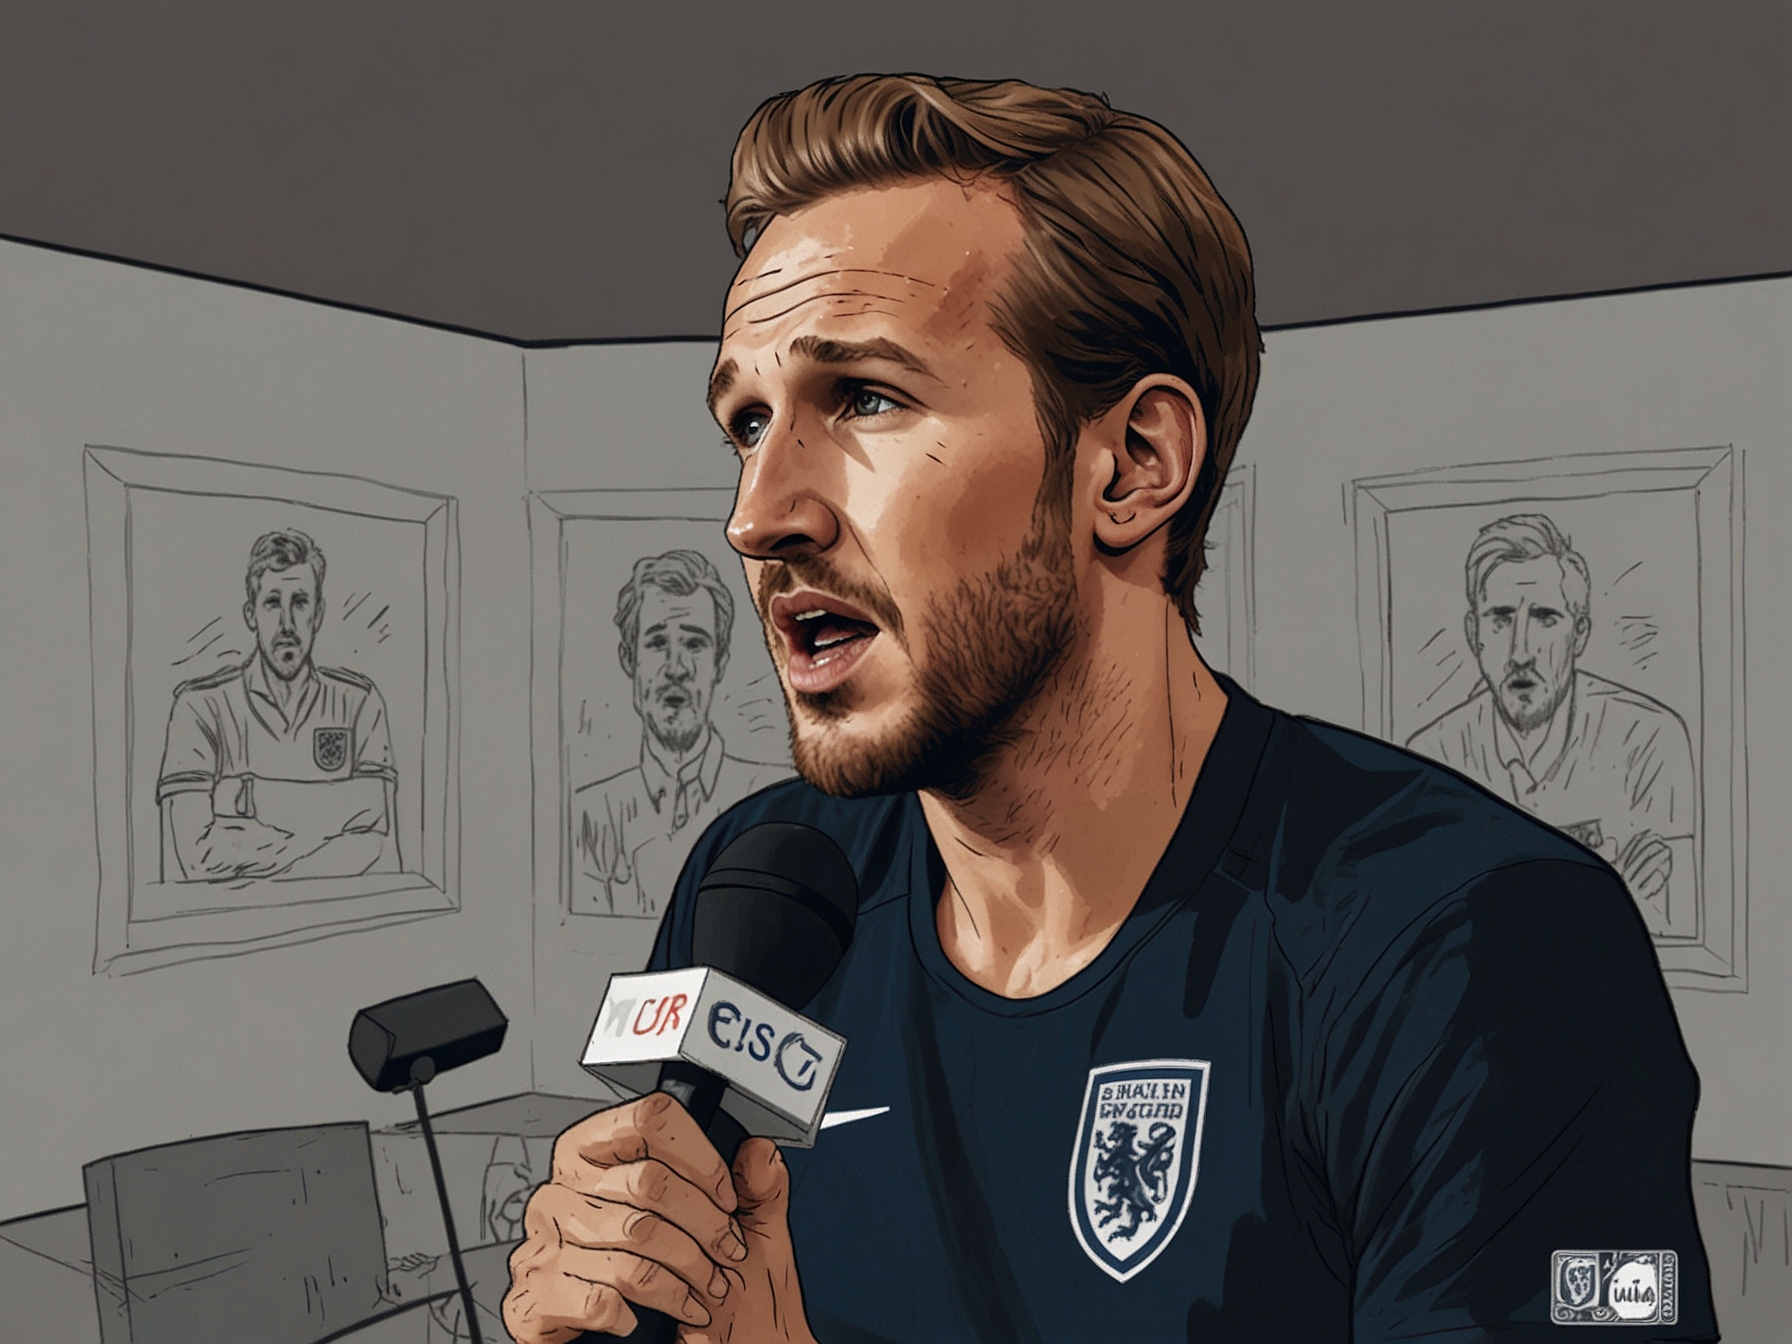 Harry Kane addressing the media after the England vs Denmark match, expressing his concerns about the team's offensive strategies and lack of creativity.